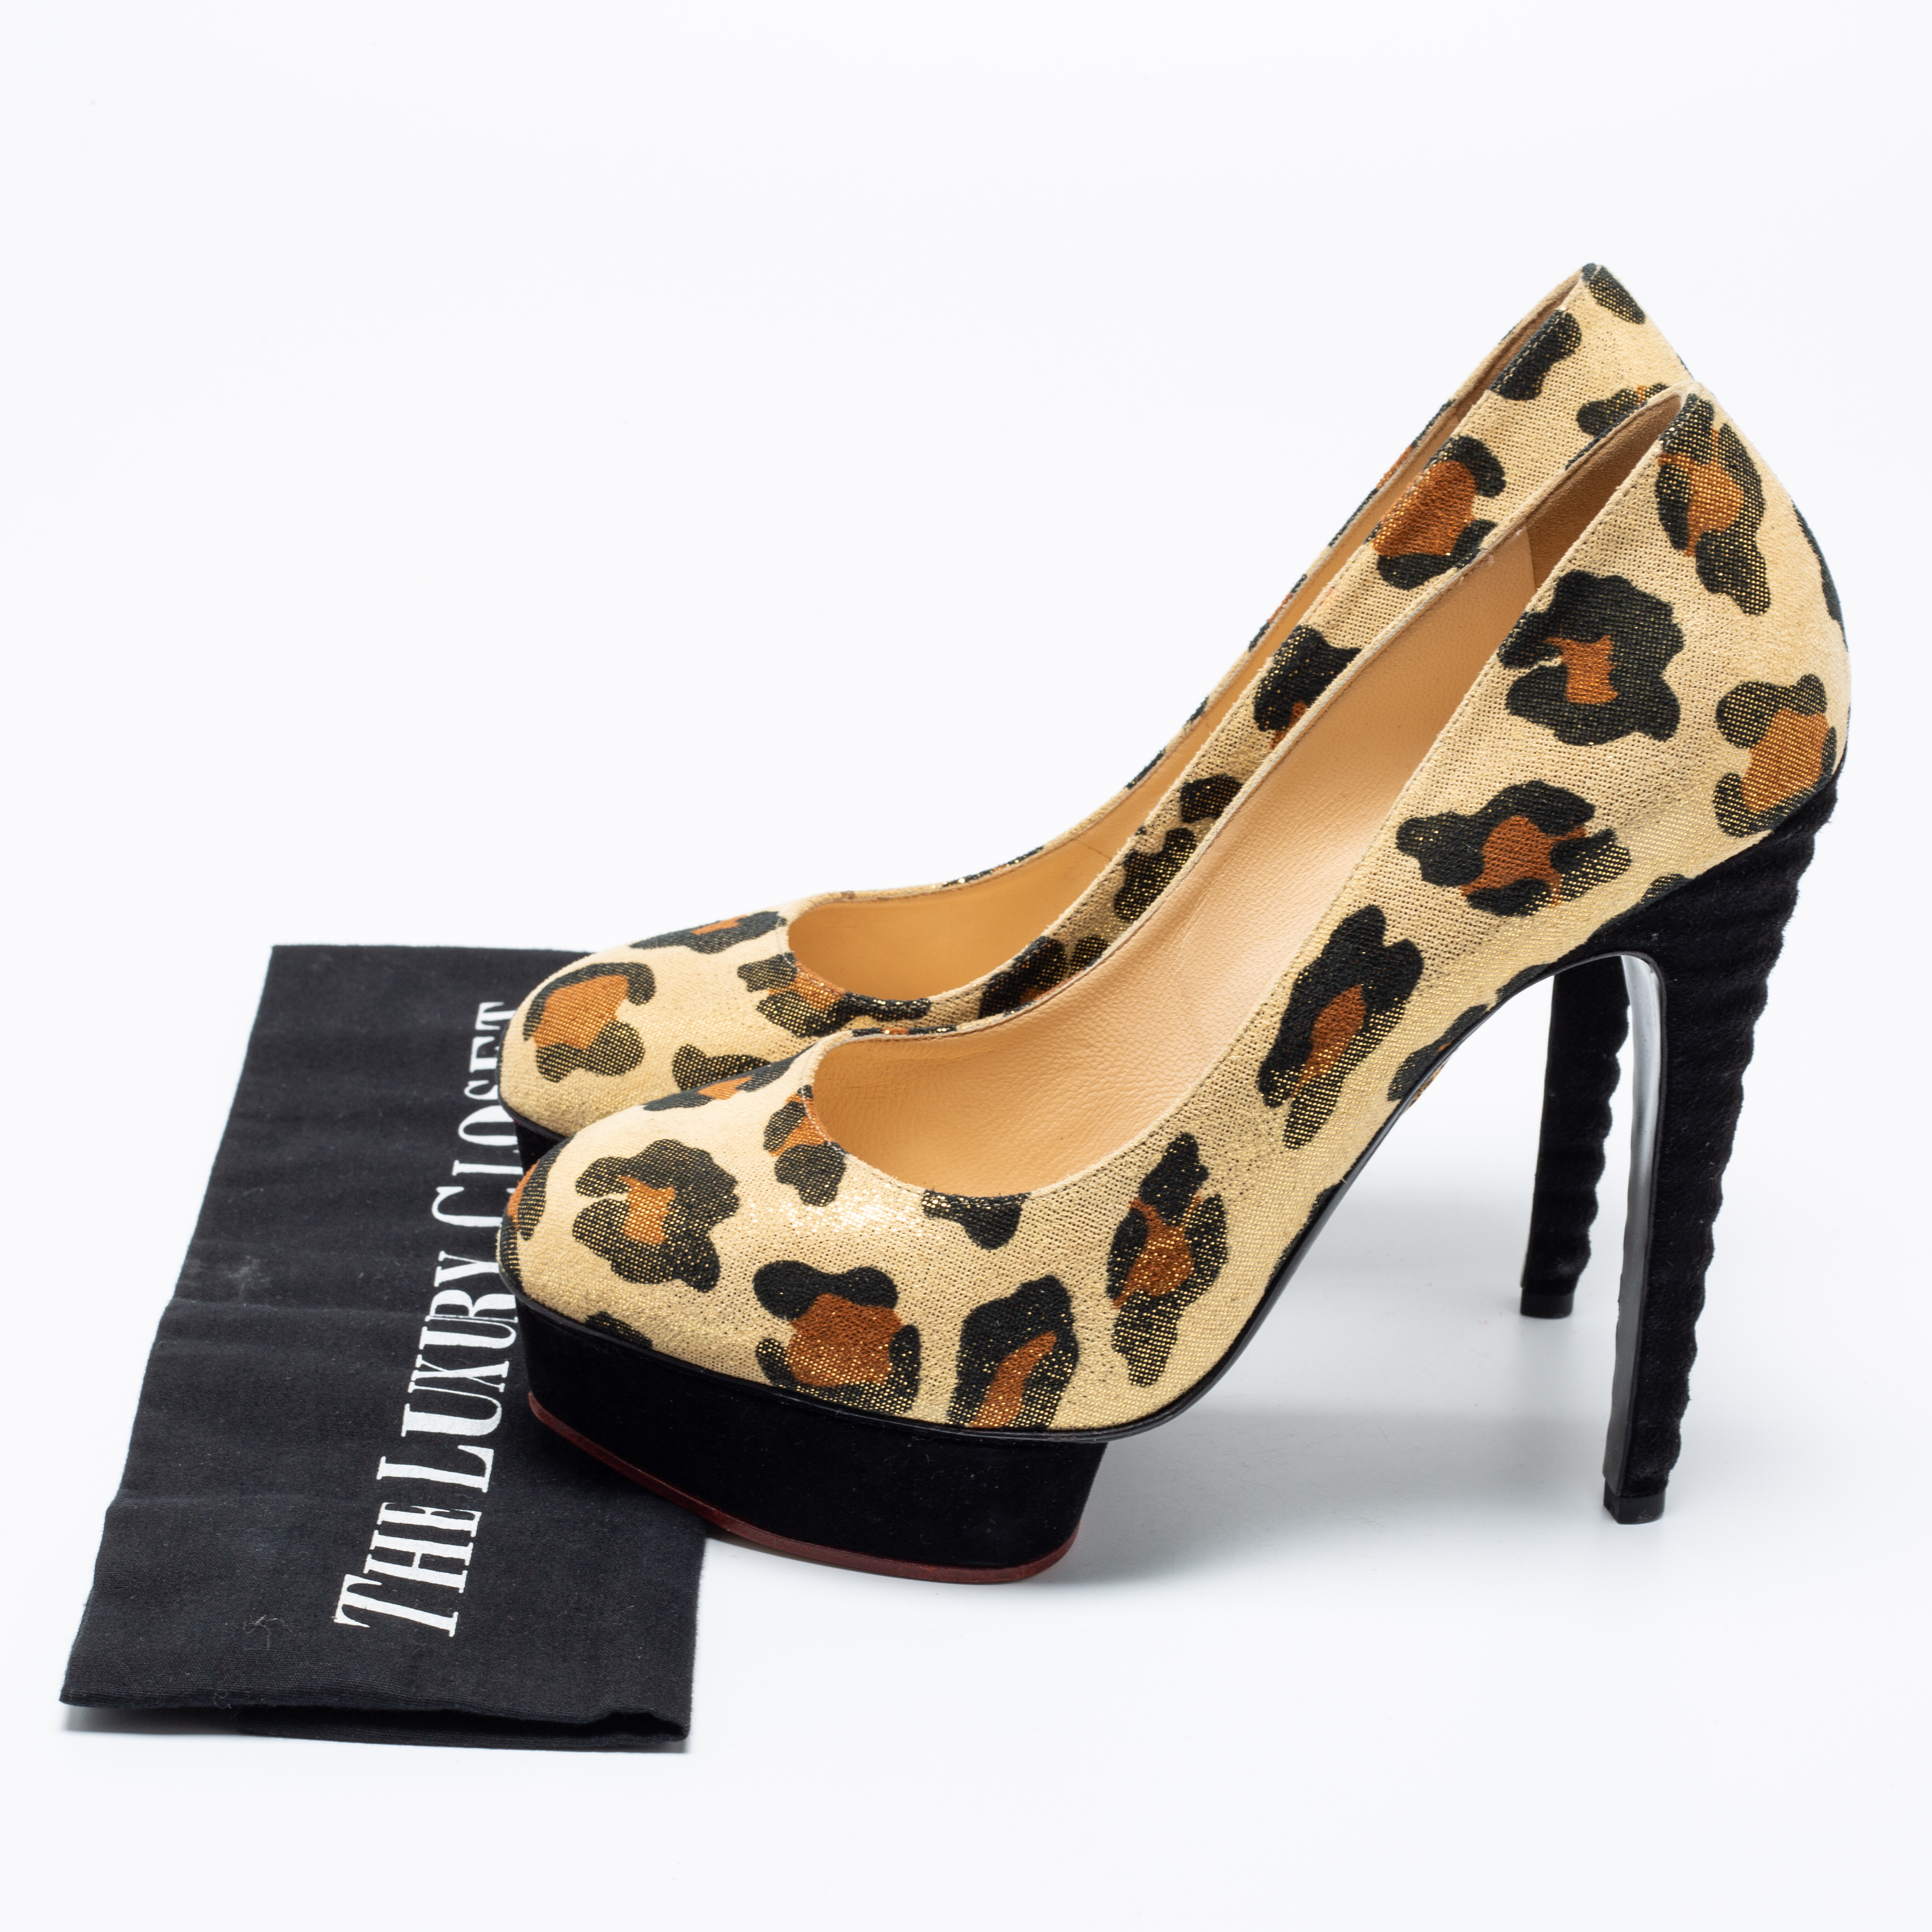 Charlotte Olympia Gold Leopard Print Glitter Suede Dolly  Pumps Size 39